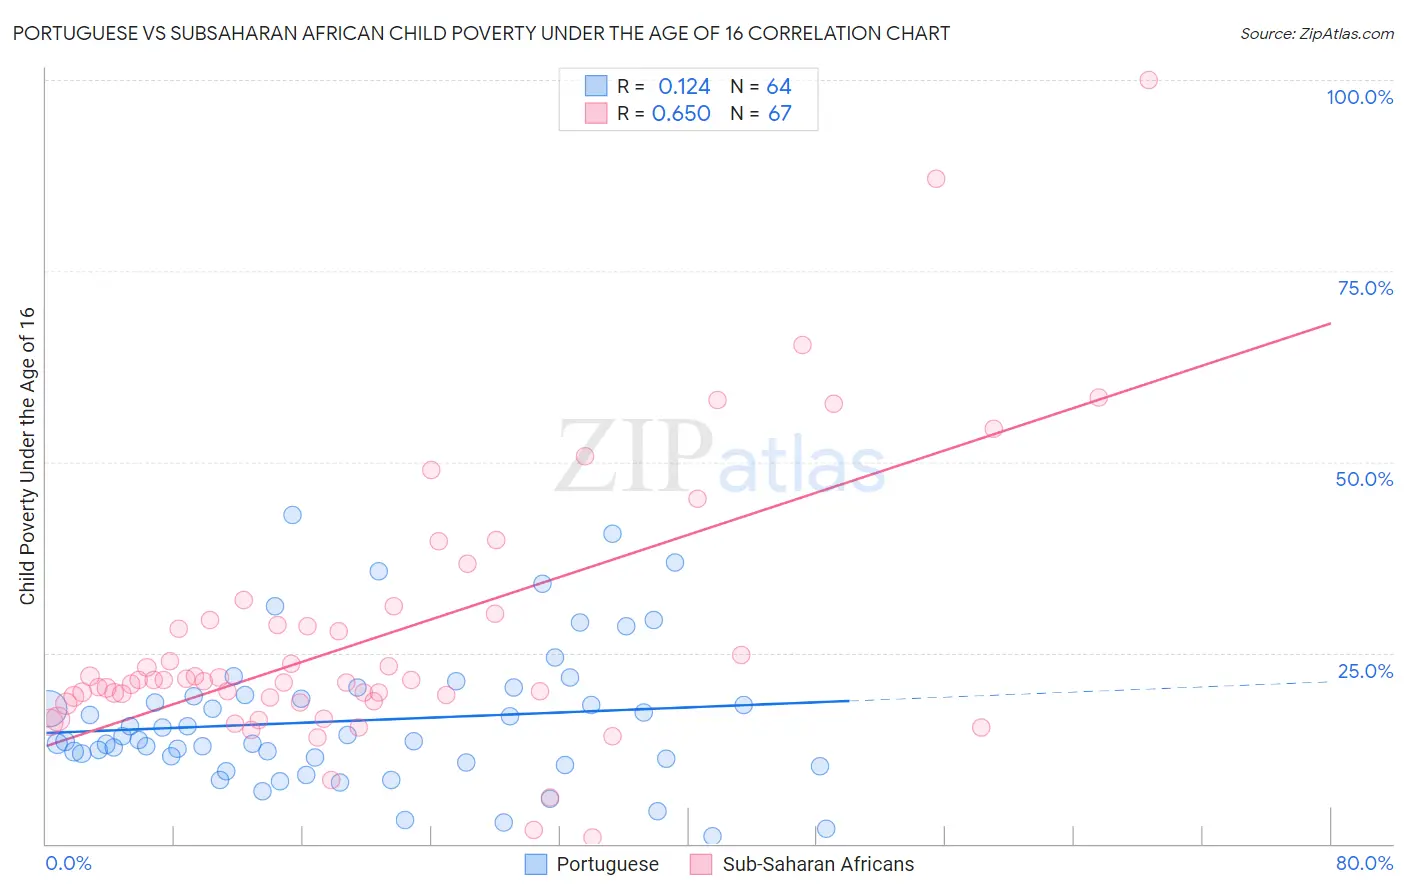 Portuguese vs Subsaharan African Child Poverty Under the Age of 16